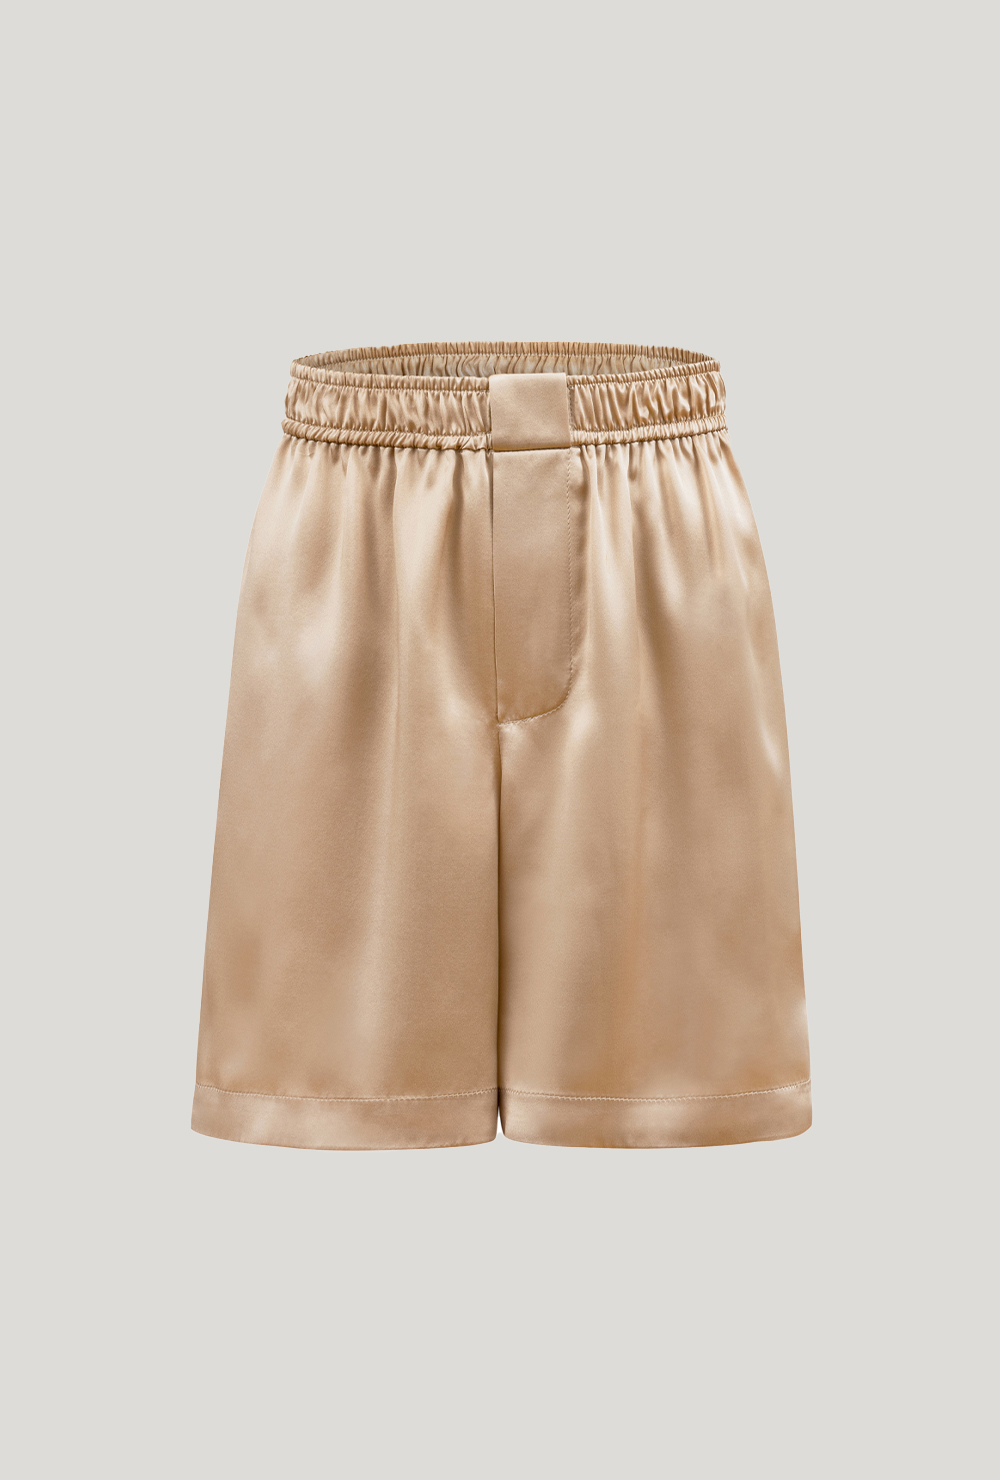 SILK BOXER SHORTS - RUBY NUDE